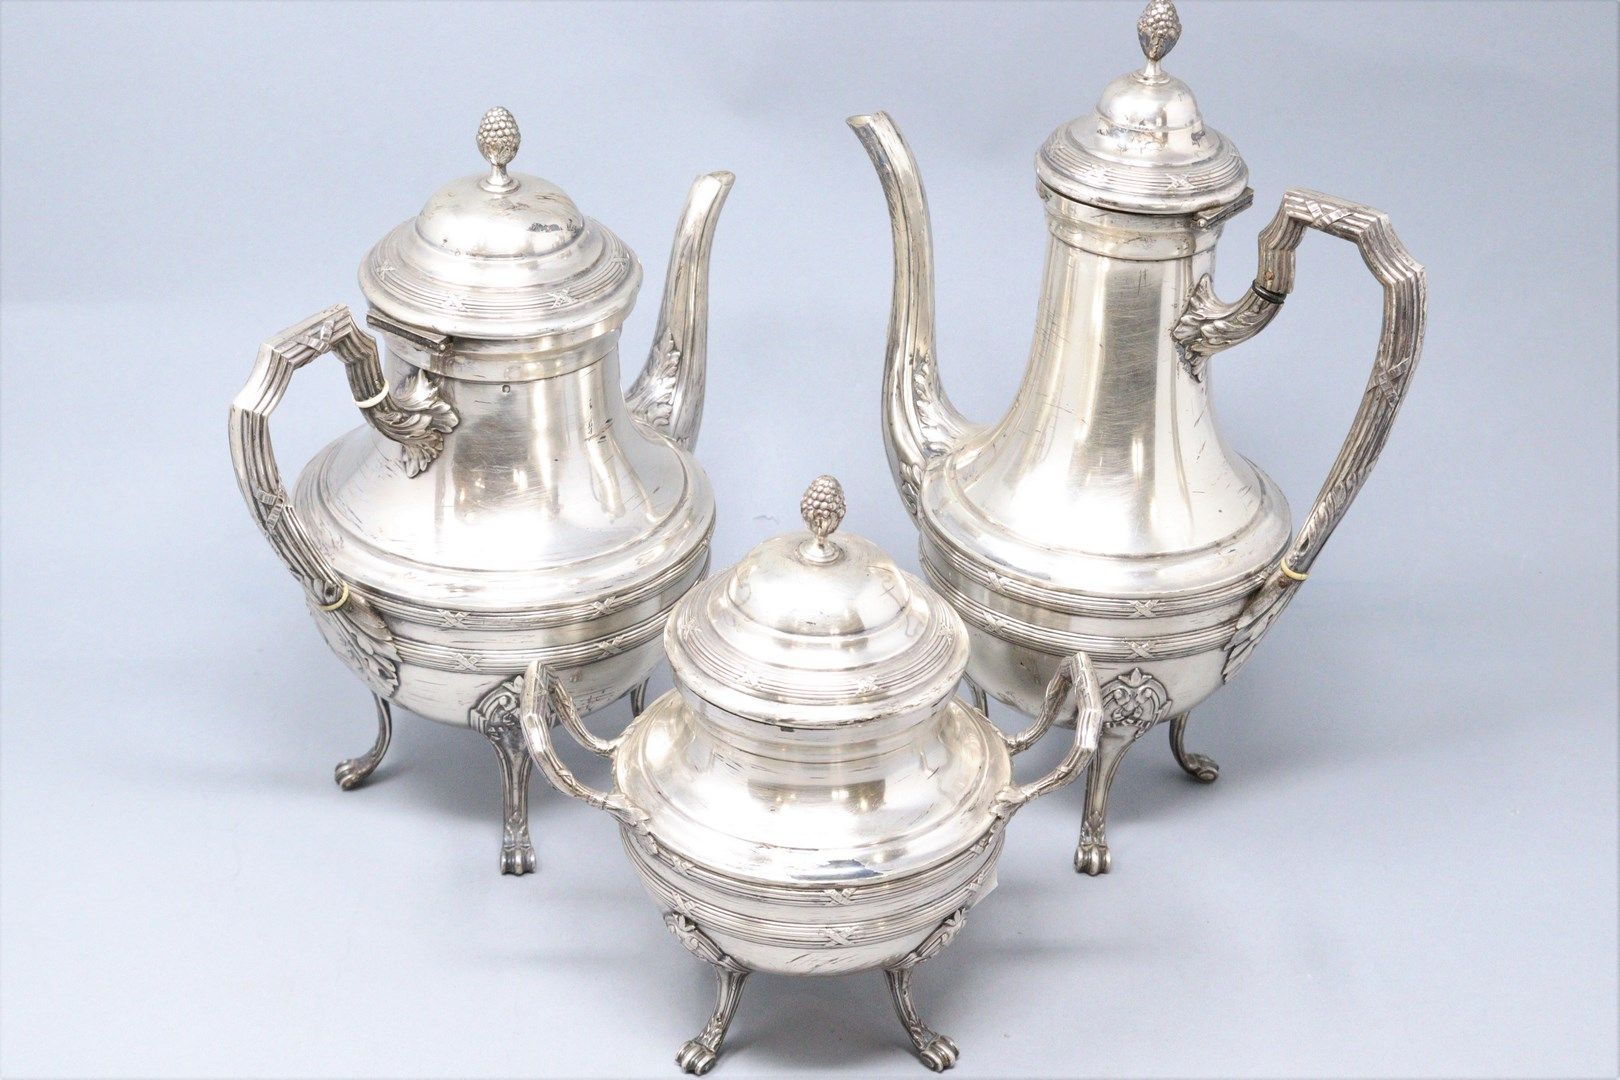 Null Silver tea and coffee set including : 

- a teapot 

- a chocolate pot

- a&hellip;